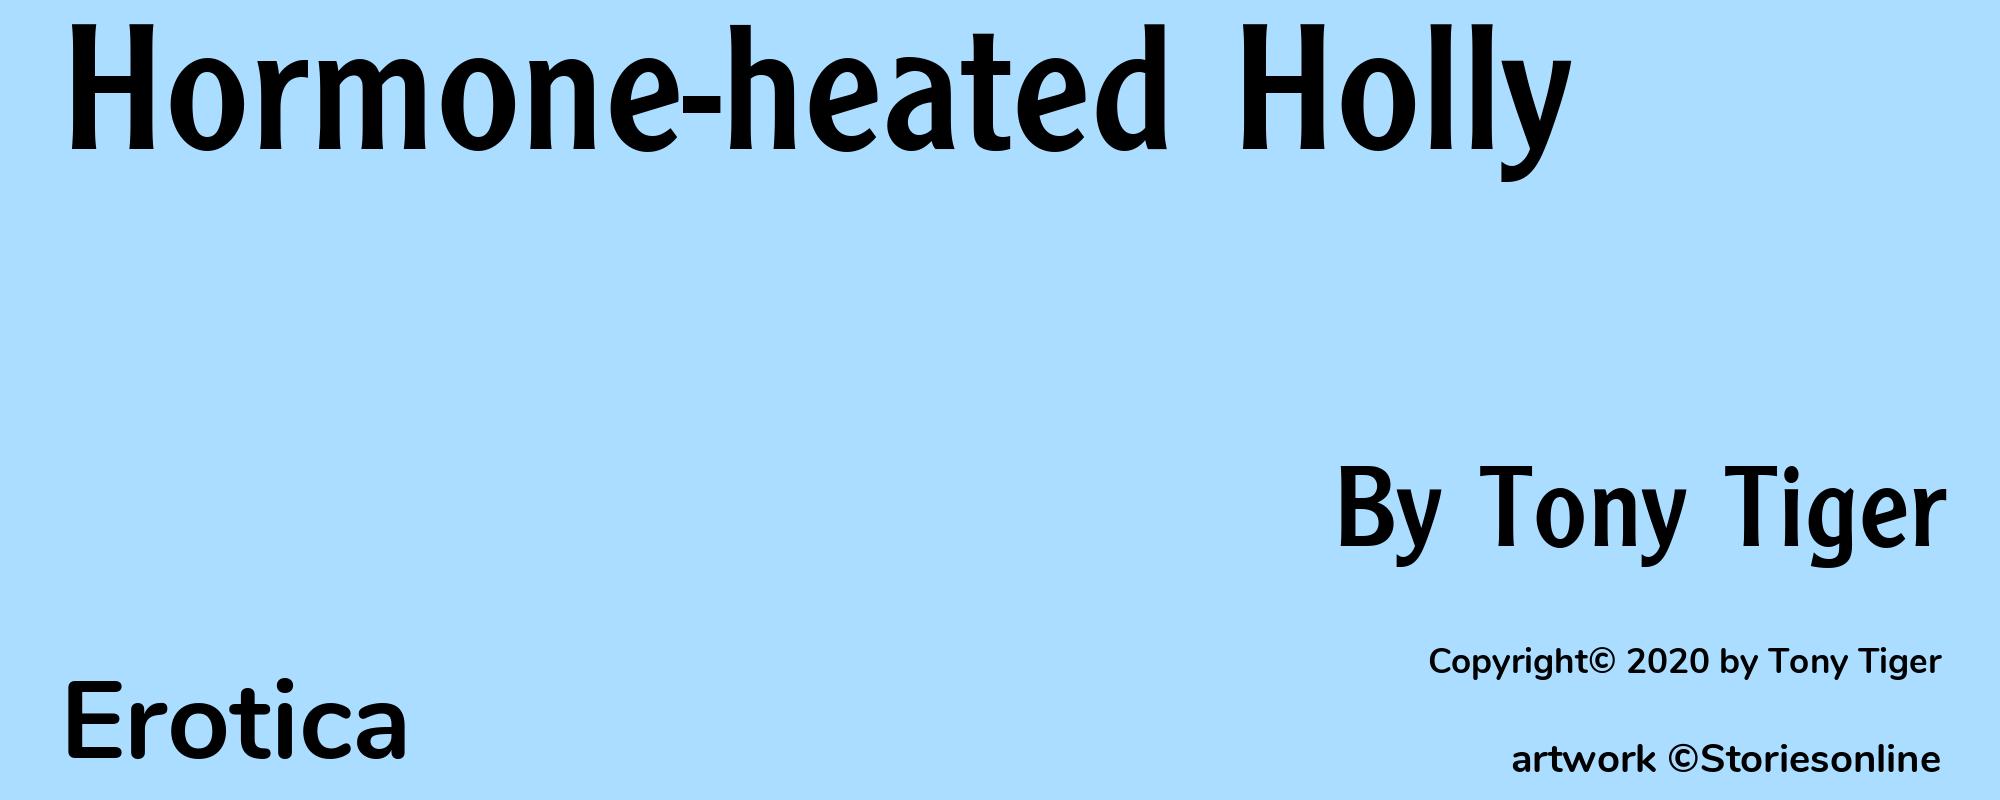 Hormone-heated Holly - Cover